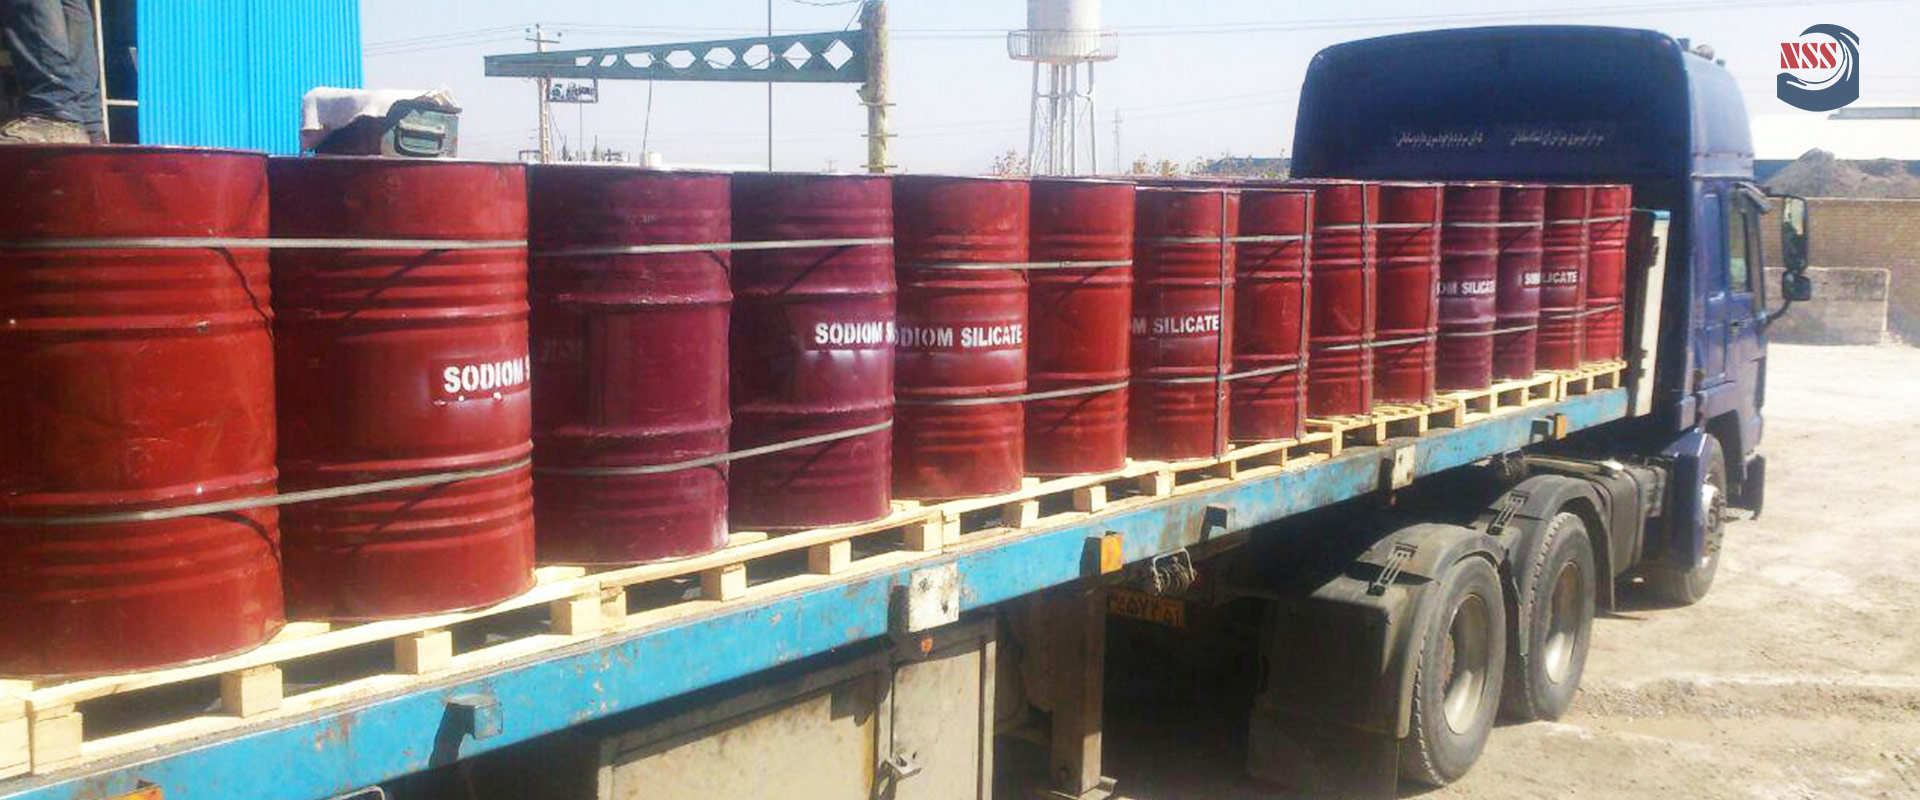 Export of Nafis Silicate Products to the Middle East